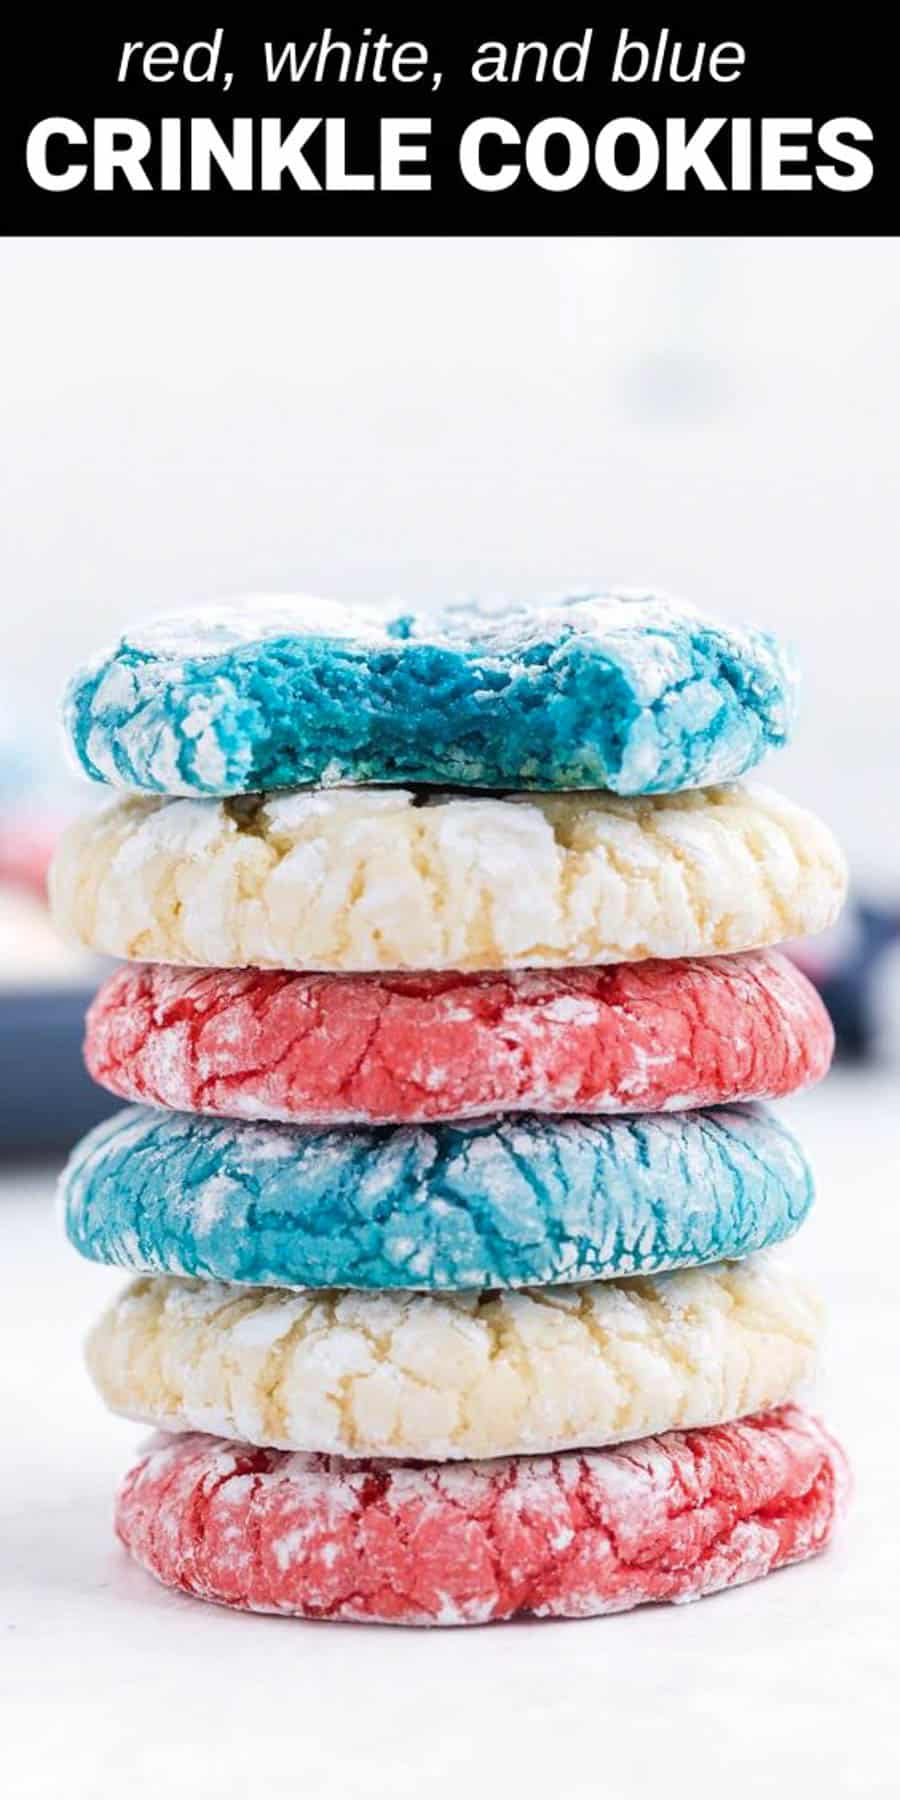 These red, white, and blue crinkle cookies are a fun and patriotic treat that’s perfect for your Fourth of July celebration. Colorful and delicious, these festive cookies are an eye-catching treat that everyone will want to try!